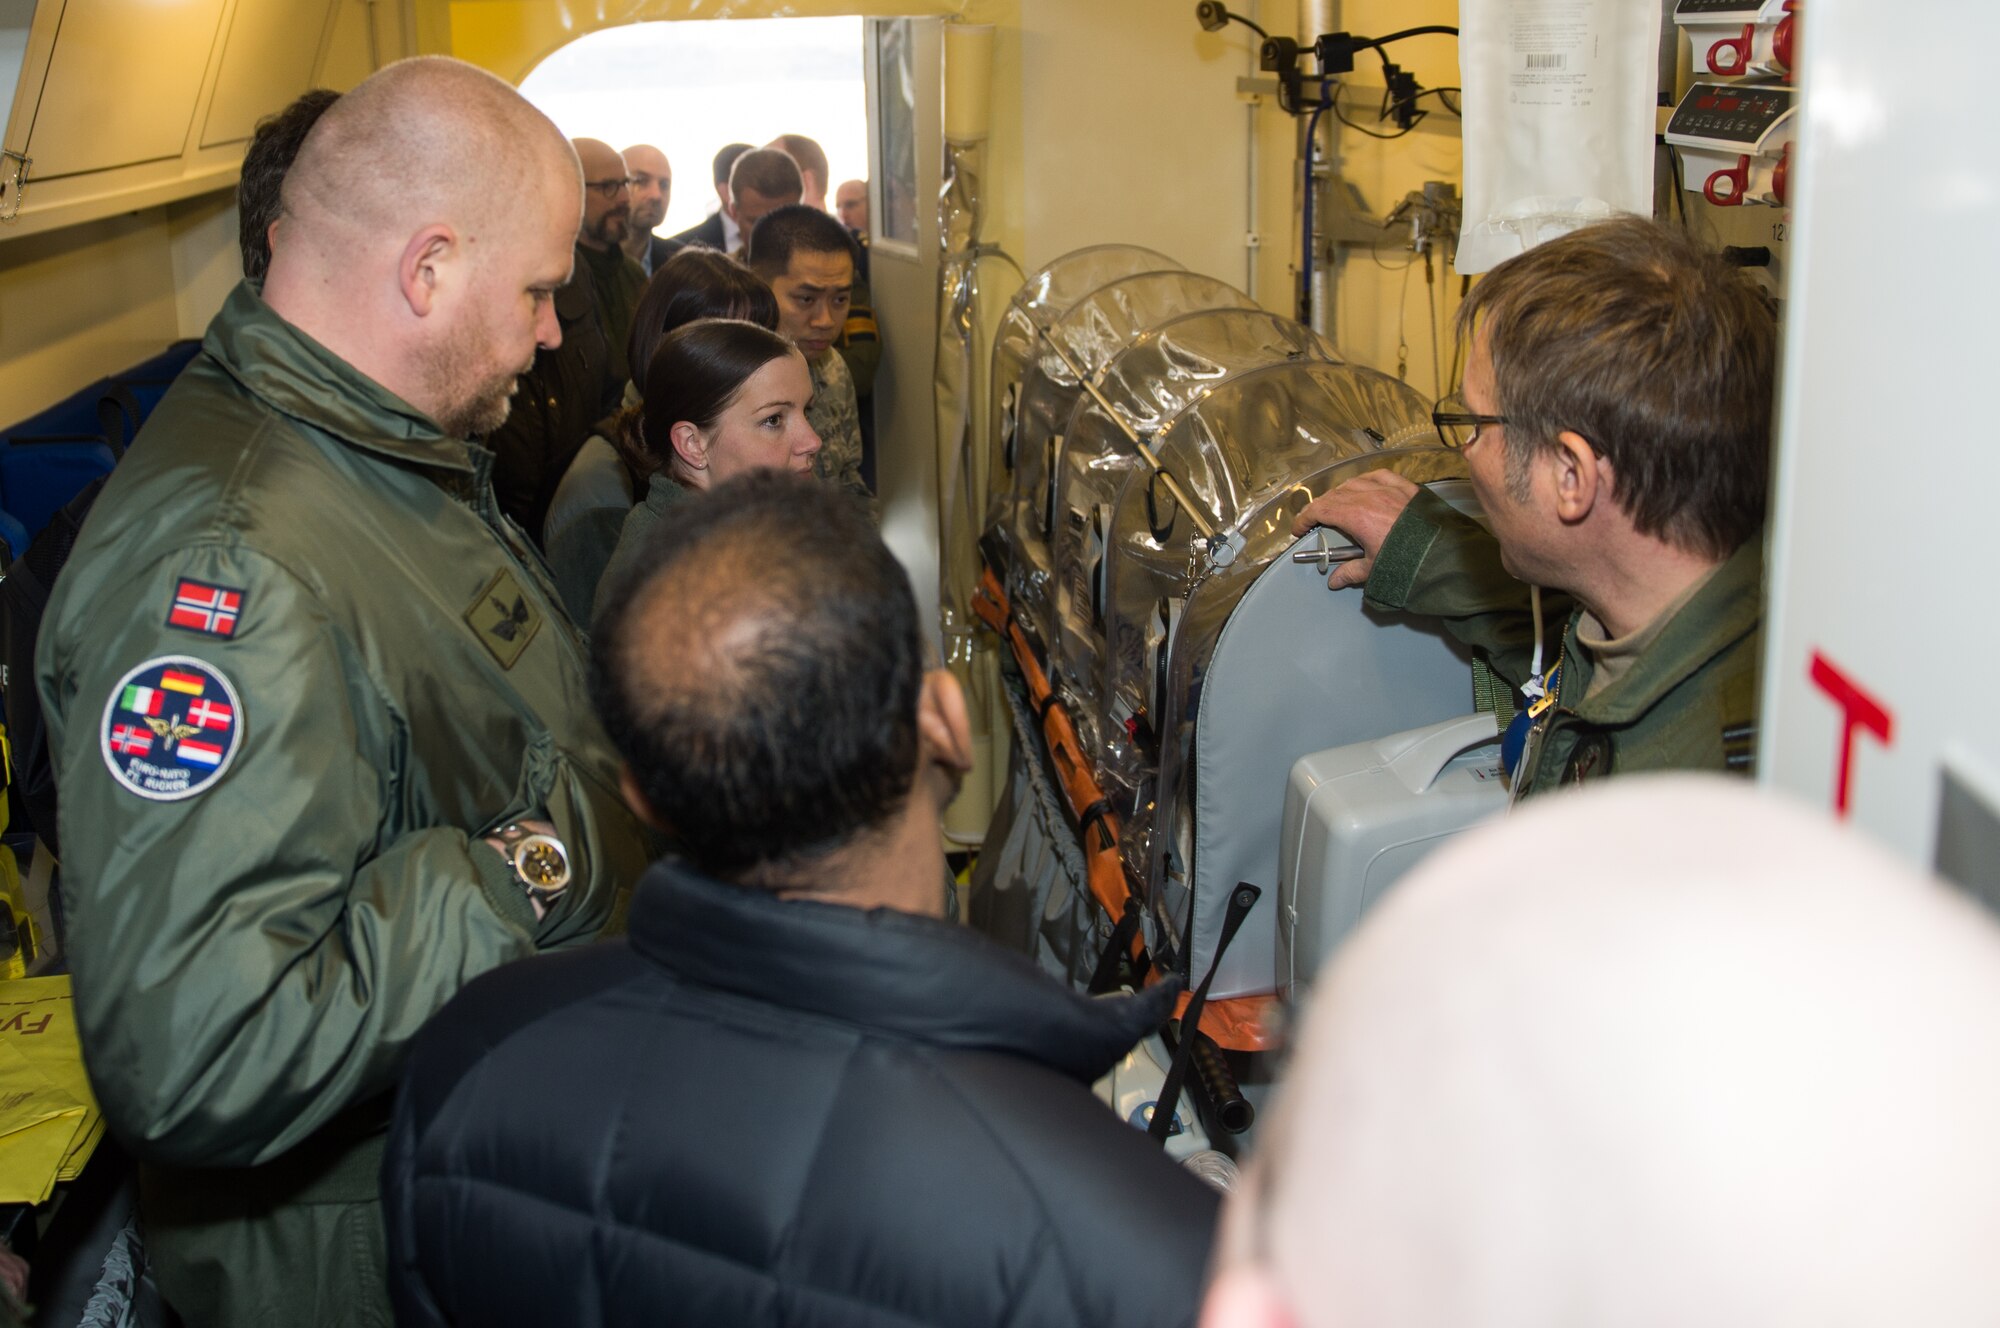 Airmen from Ramstein and international medical professionals tour a Royal Danish air force C-130J Super Hercules at Ramstein Air Base, Germany, March 11, 2015. During the 30th Ramstein Aerospace Medicine Summit and NATO Science and Technology Organization Technical Course, attendees learned about new technologies, methods and current practices to help develop each other’s medical programs. (U.S. Air Force photo/Staff Sgt. Armando A. Schwier-Morales) 